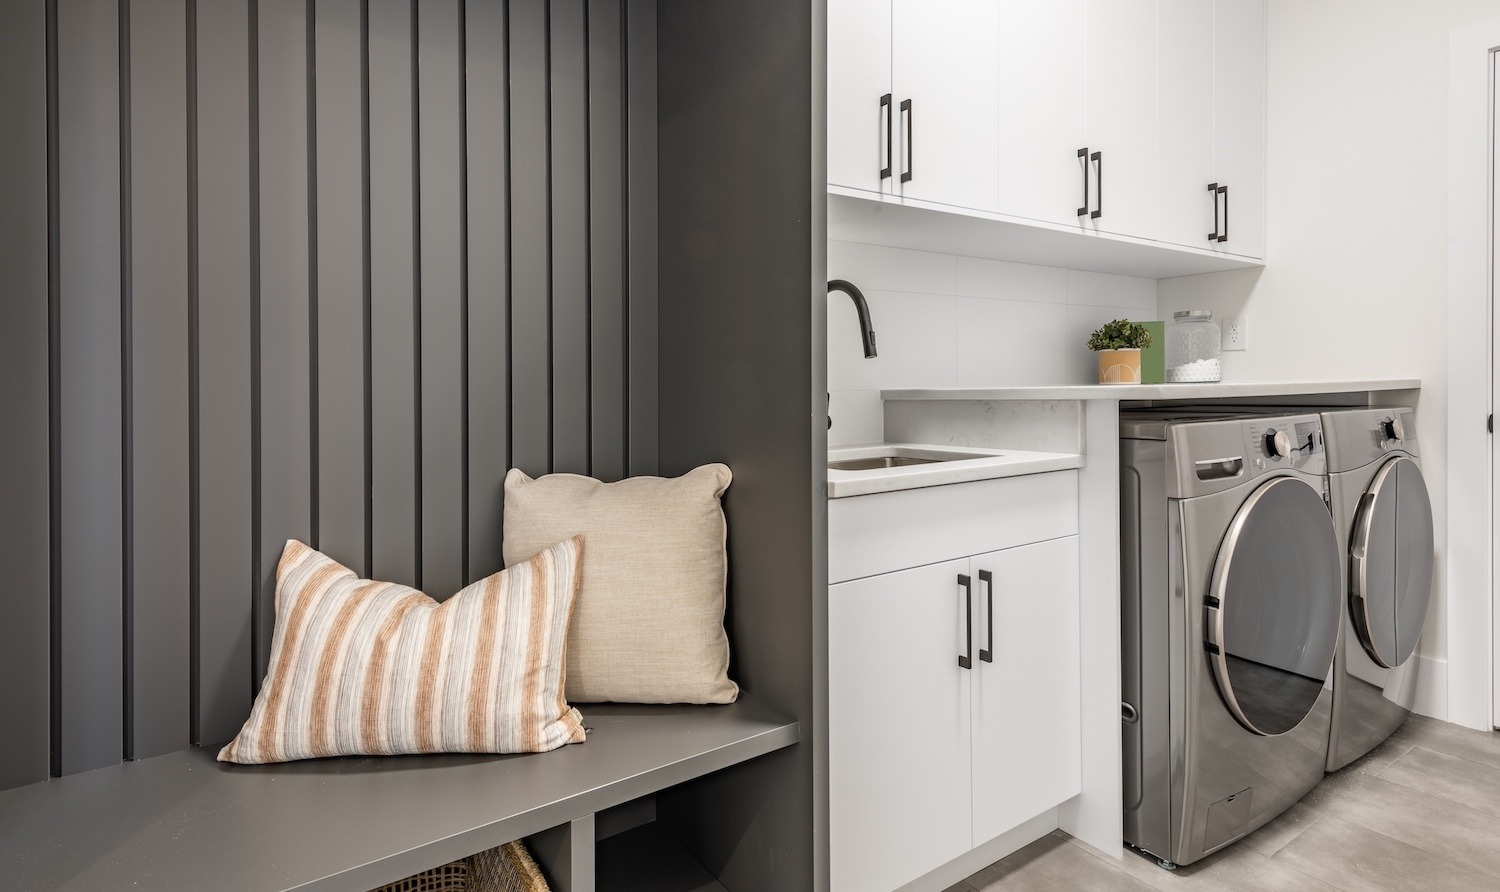 LAUNDRY ROOM - Closets unlimited